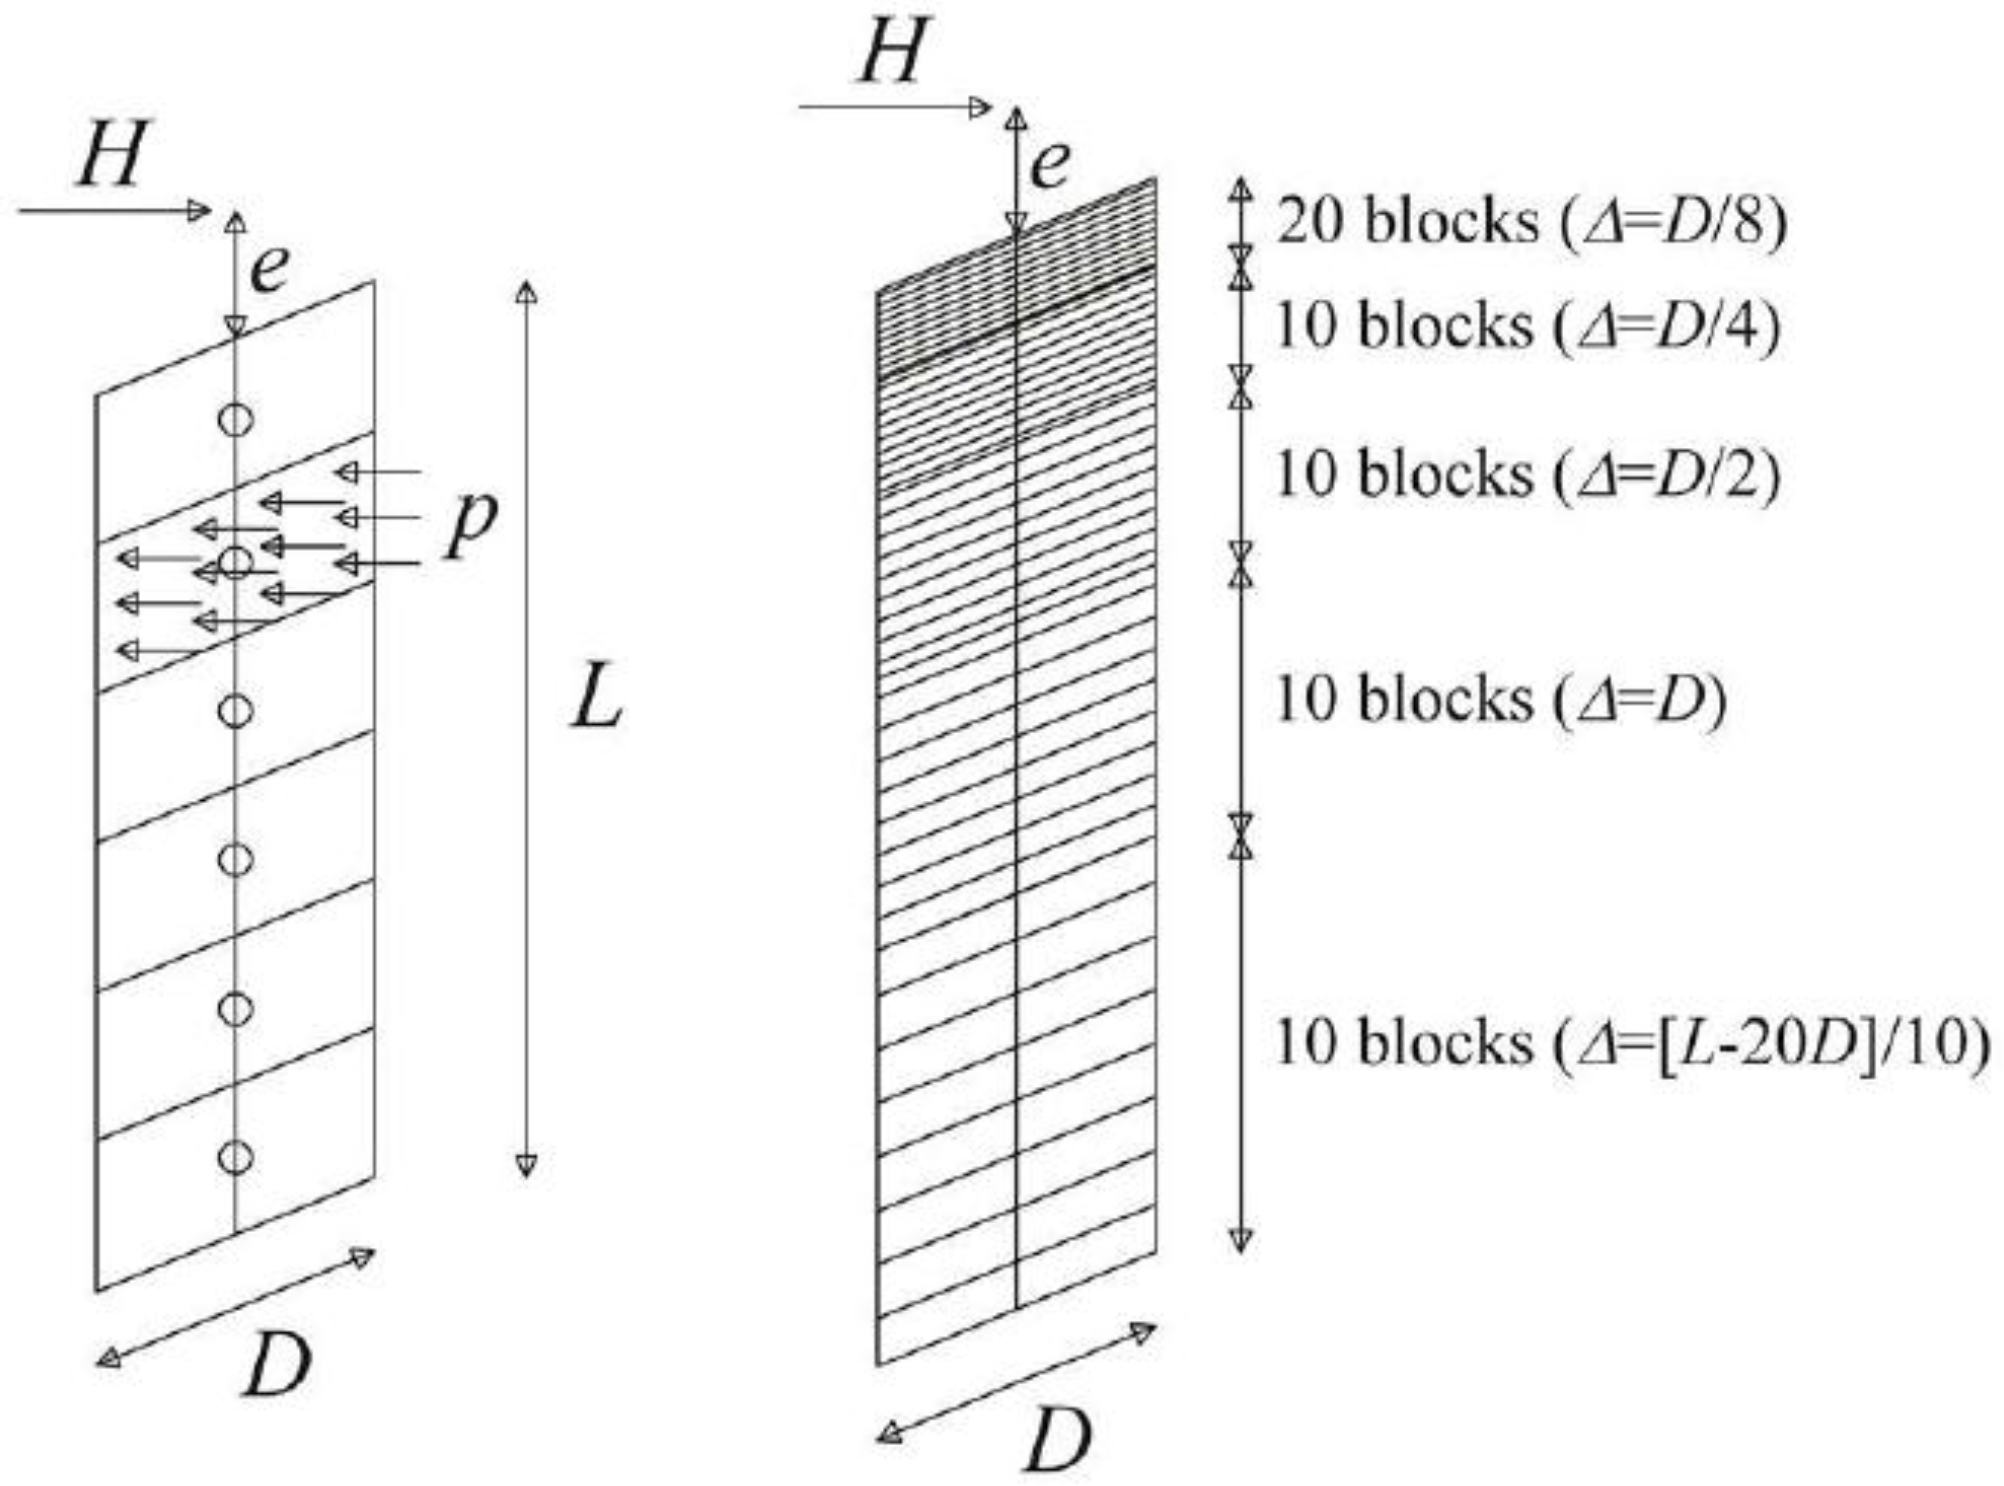 Undrained Lateral Resistance of Fixed-Headed Rectangular and Circular Piles